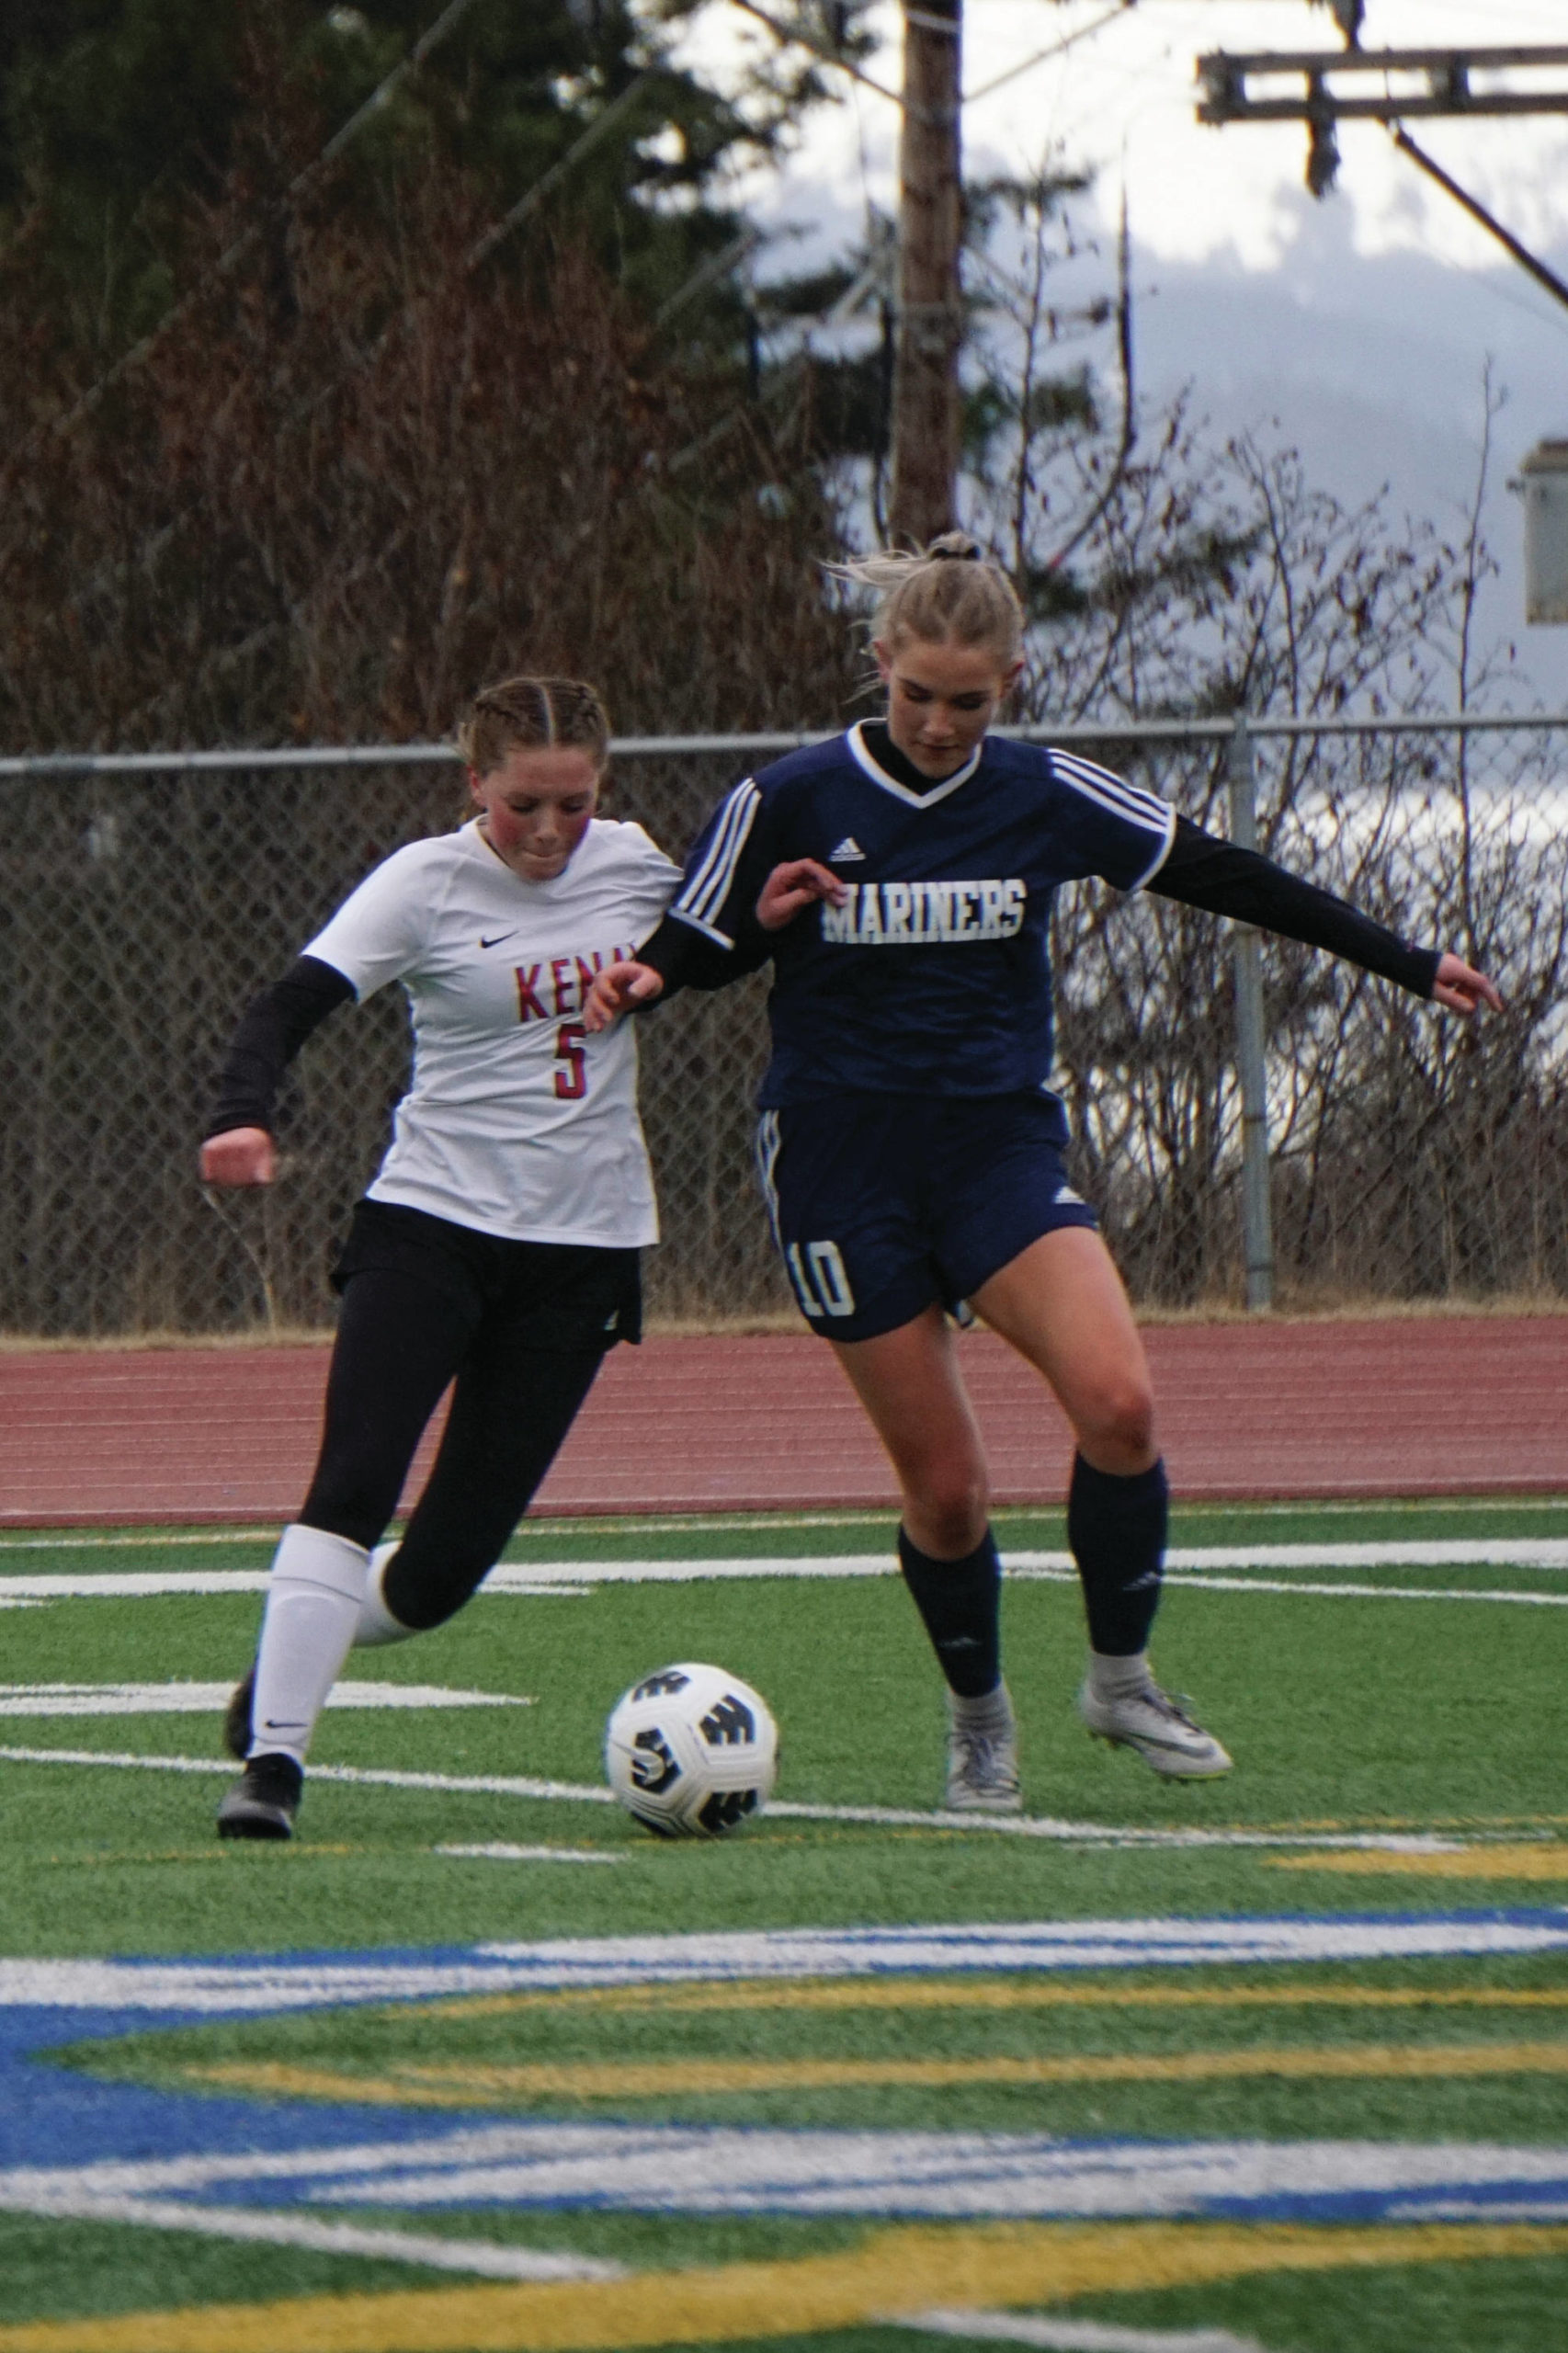 Lady Mariner Paige Jones, midfield, defends against Kenai Kardinals No. 5 on Thursday, April 22, 2021, at the Homer High School field in Homer, Alaska. (Photo by Michael Armstrong/Homer News)